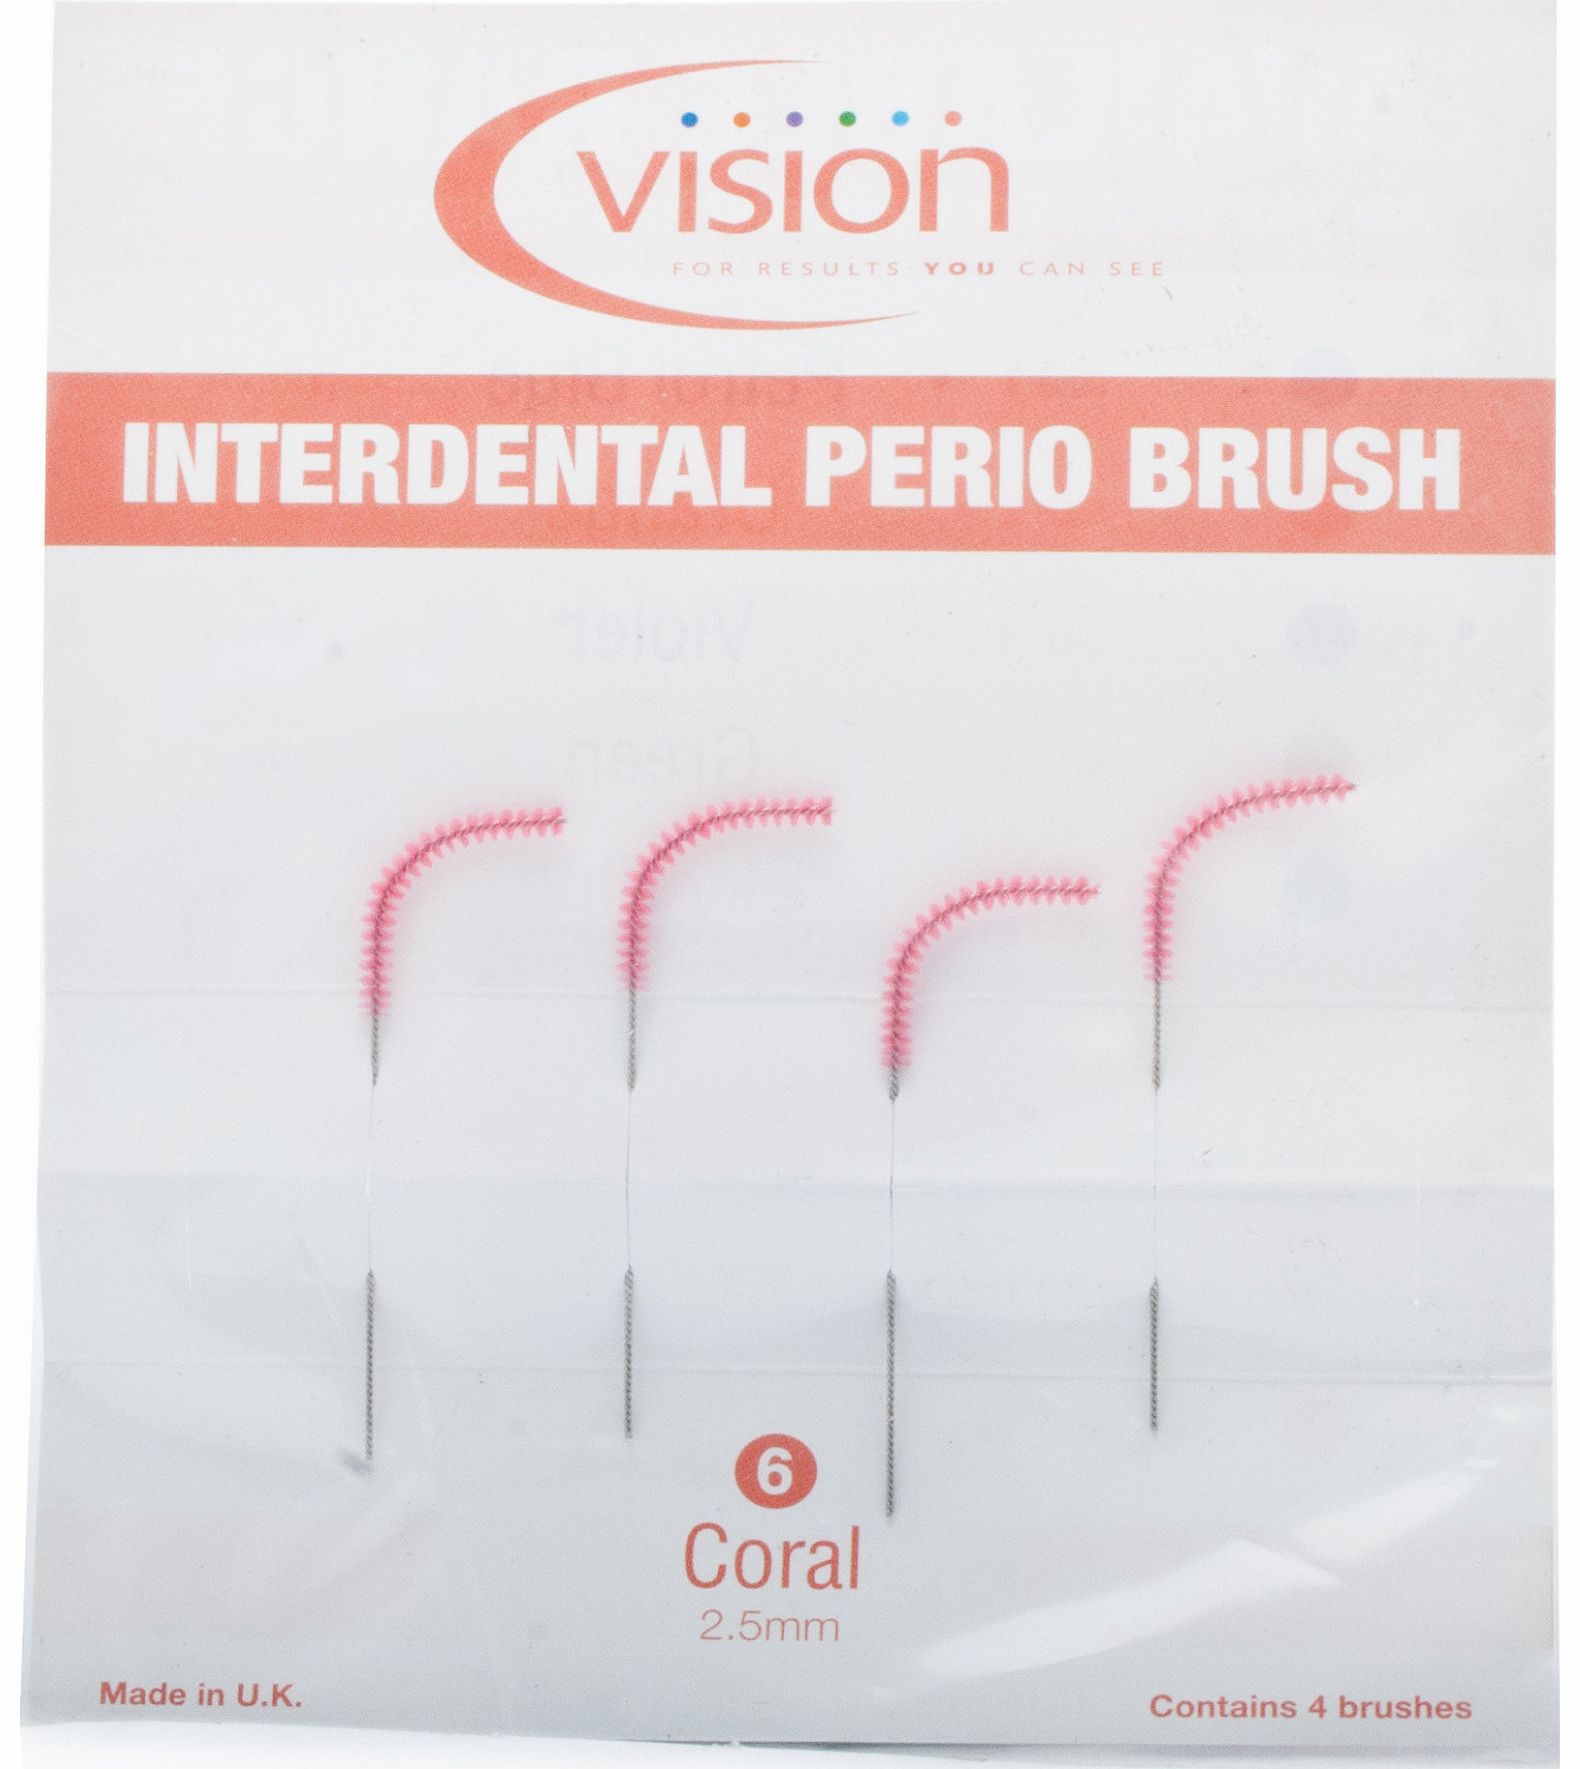 Vision Interdental Perio Brushes - 2.5mm Coral